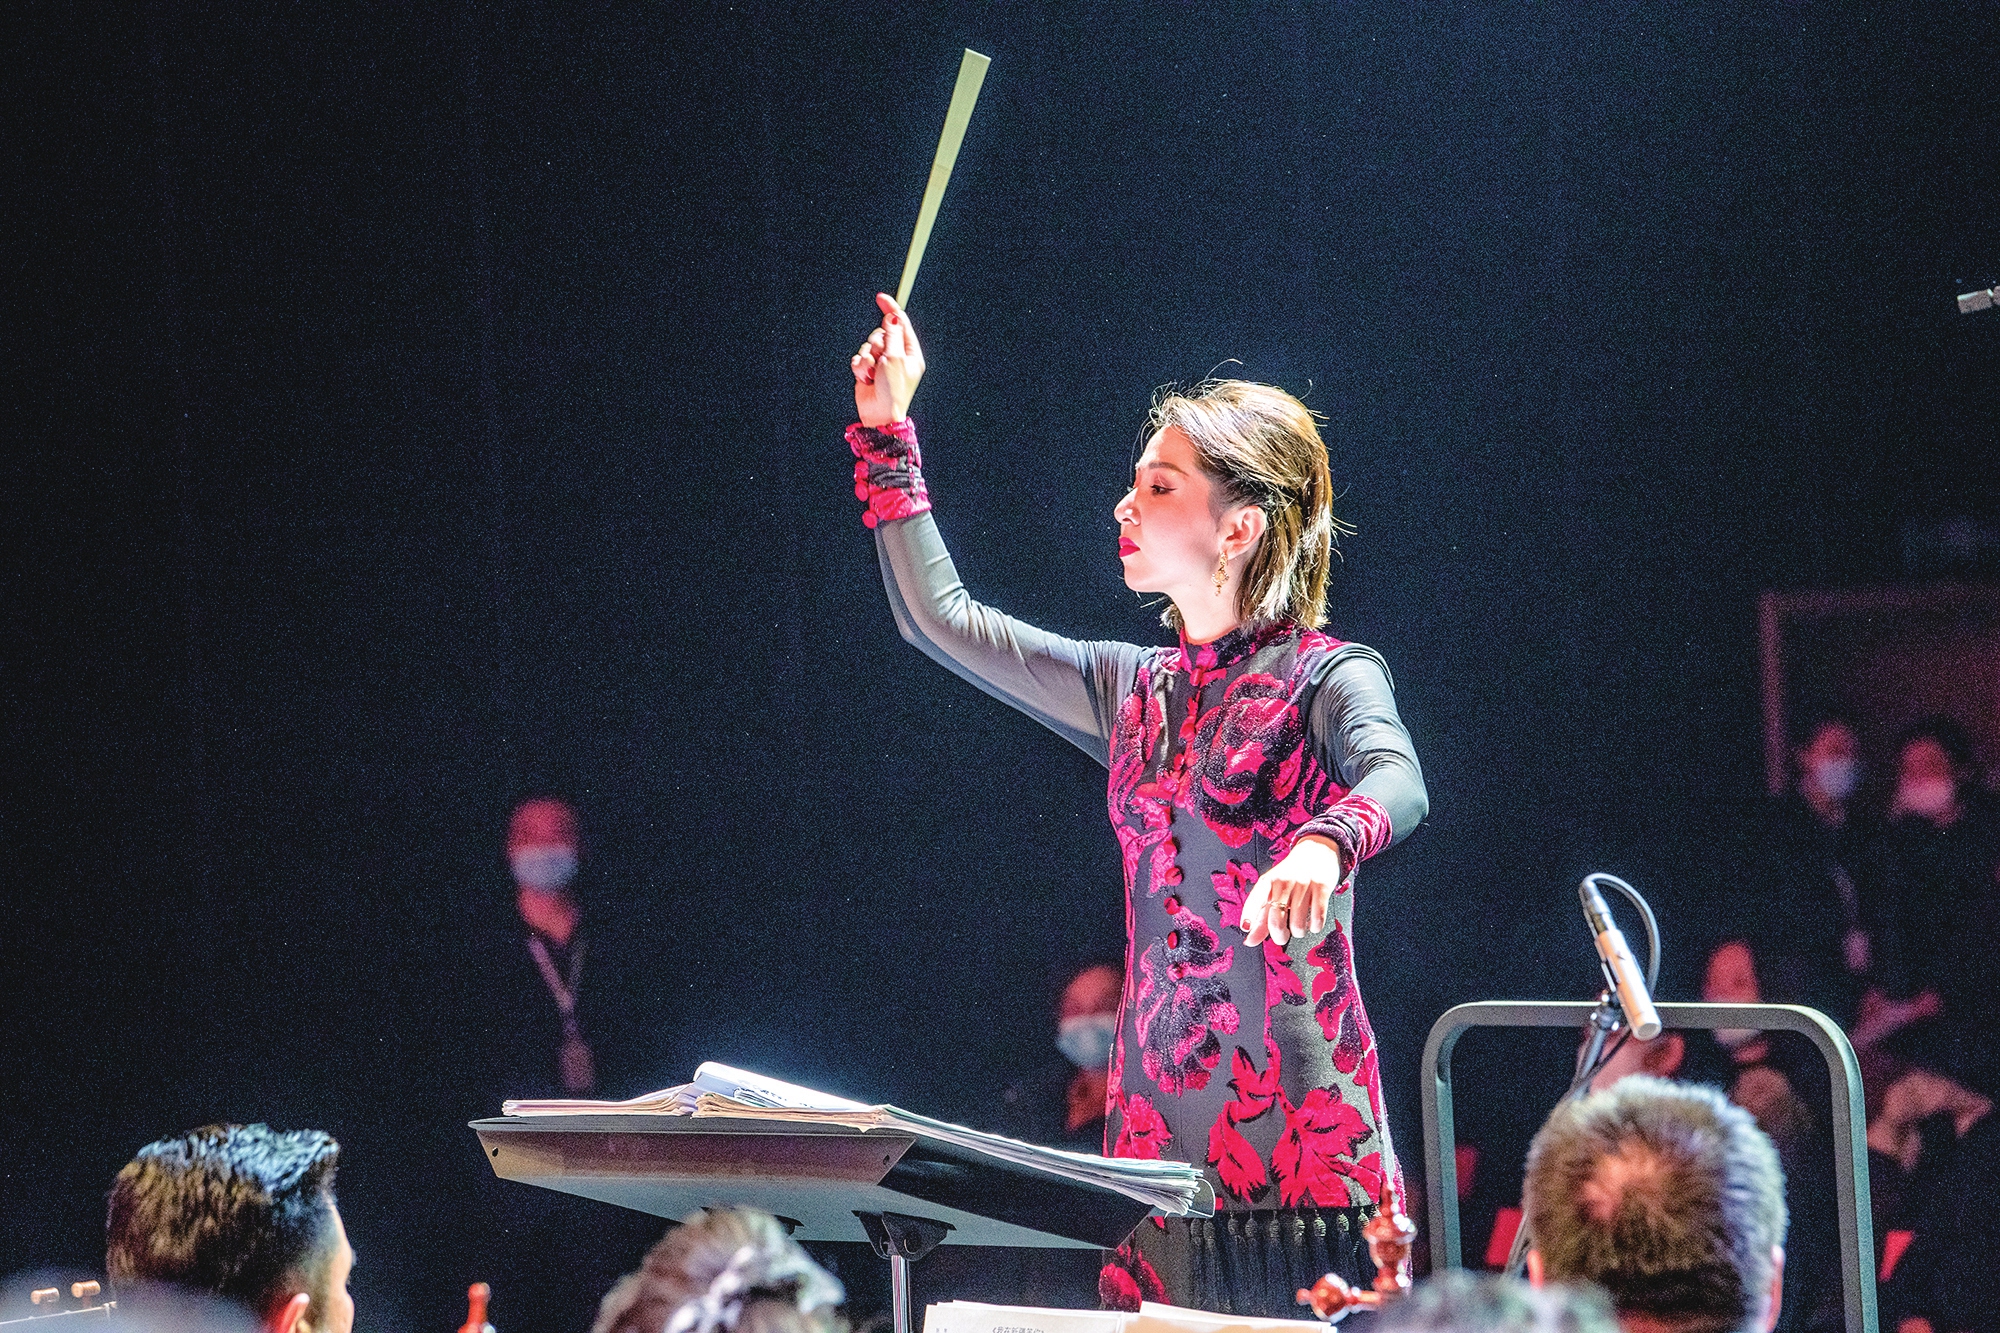 Nuerbana Yiming conducts during a concert with Xinjiang Arts Theater's folk orchestra. Photo: Courtesy of Muerbana Yiming